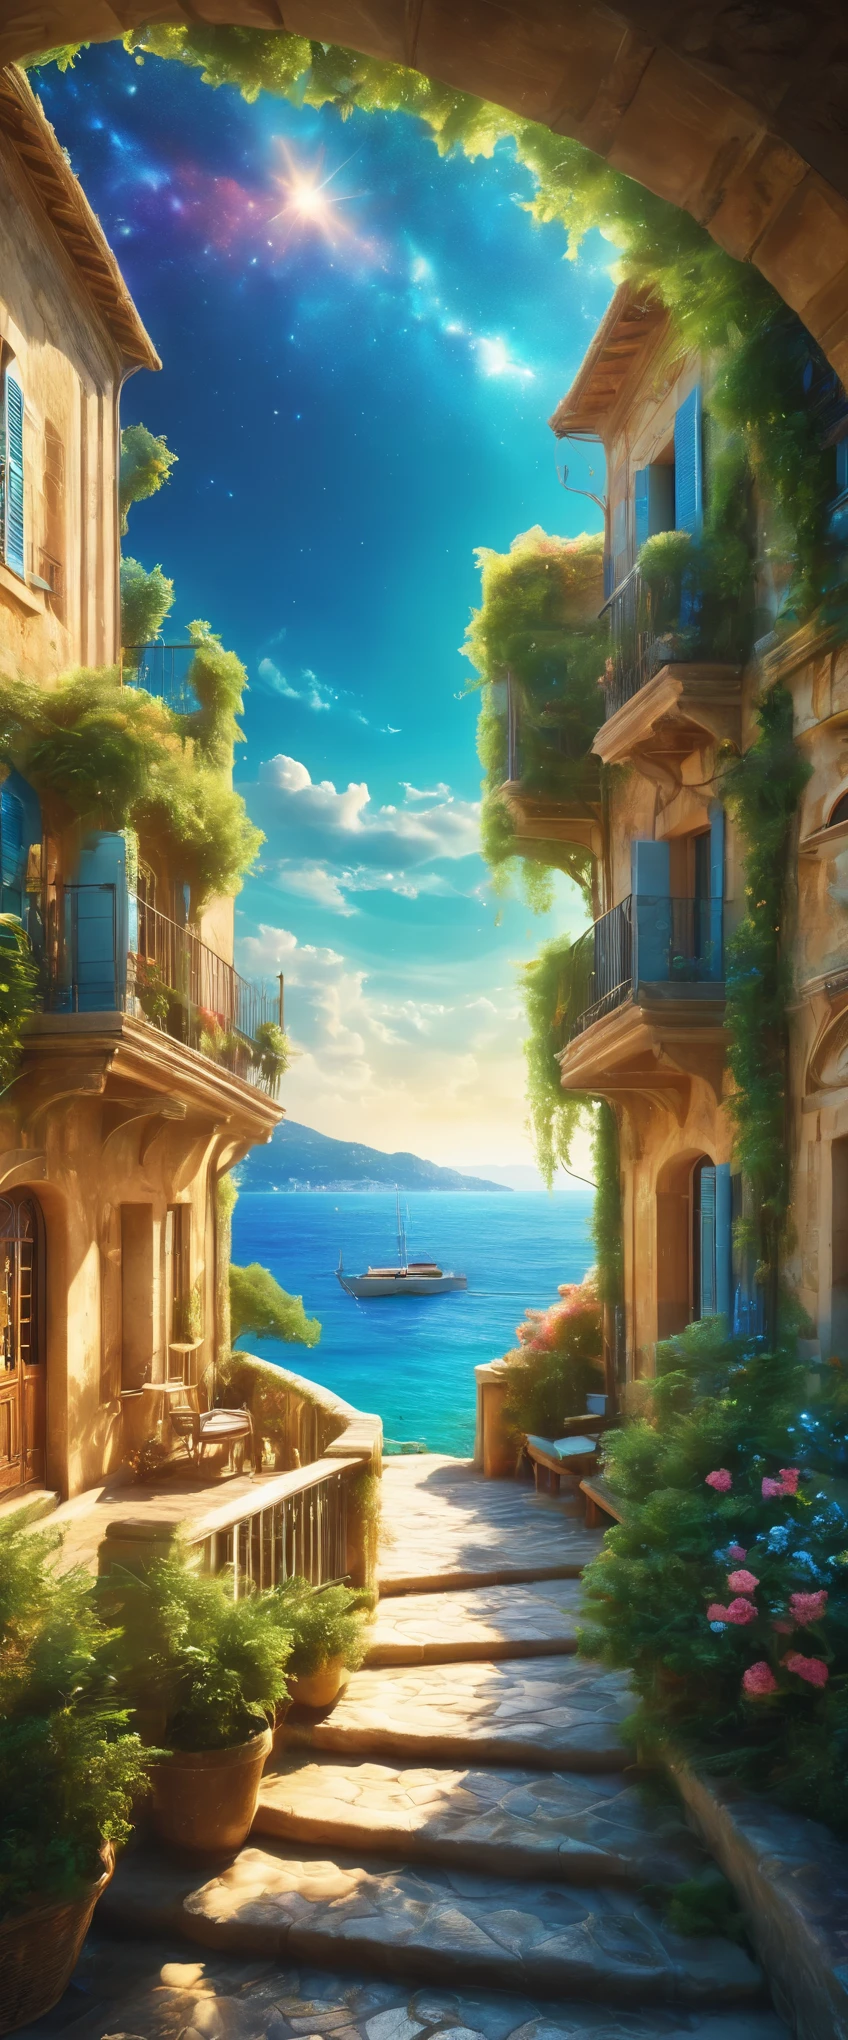 Cote d&#39;Azur:South of France:A coastline known as a scenic resort,Resort scenery,holiday,美しい風景photograph,Fantasy,Dreamy,Beautiful sea,高品質でwonderful家具:Designer furniture,A beautiful sky spreads out,dream-like,summer,cloud,Sky blue,Marine blue,wonderful景色が広がる,Luxury Resorts,Extravagant space,Soft mouth cap,Surrounded by abundant nature,Highestの時間をあなたに,Highest品質,photograph,Structurally correct,Perfect composition,広告用に撮影されたphotograph,Beautiful light and shadow,Photographed by a professional photographer,Highestのリゾート地に選ばれた,Rich colors,Cast colorful spells,detailed,wonderful,wonderful,South of France,Light effects,Glitter,reflection,night,night空,star,Highest